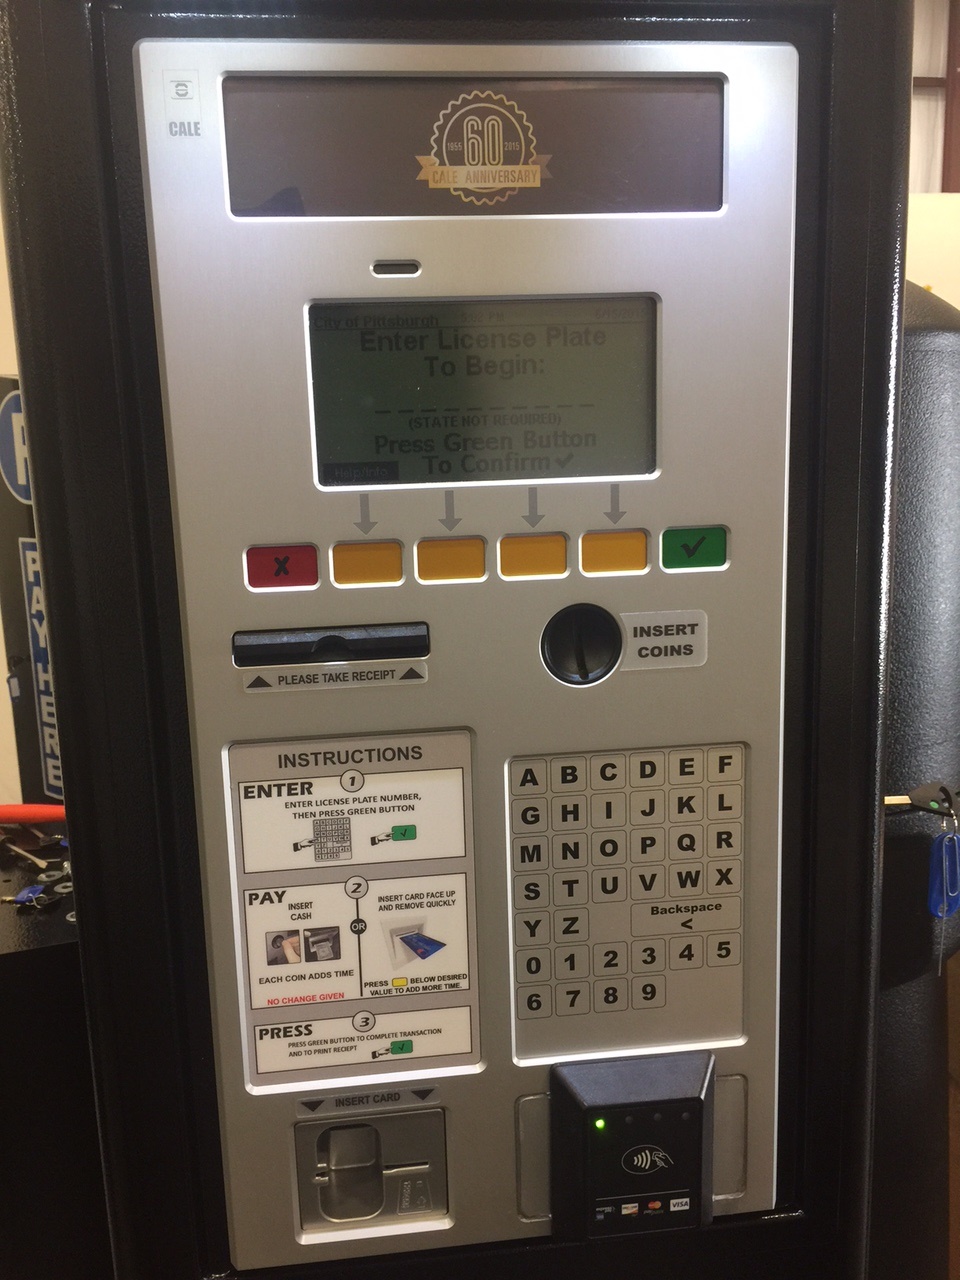 Cale CWT pay station with Apple Pay contactless reader